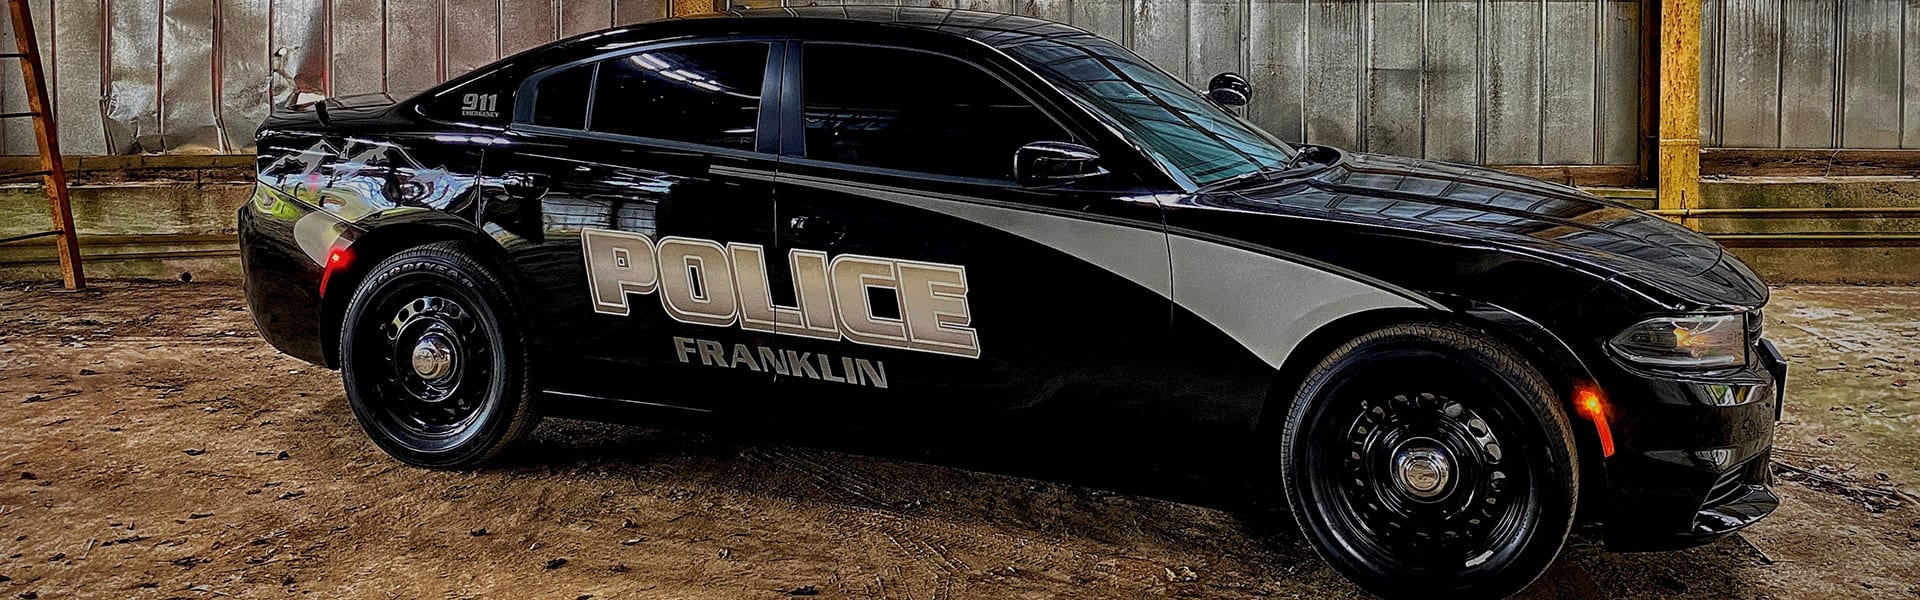 Forms And Permits Town Of Franklin Nc Police Department